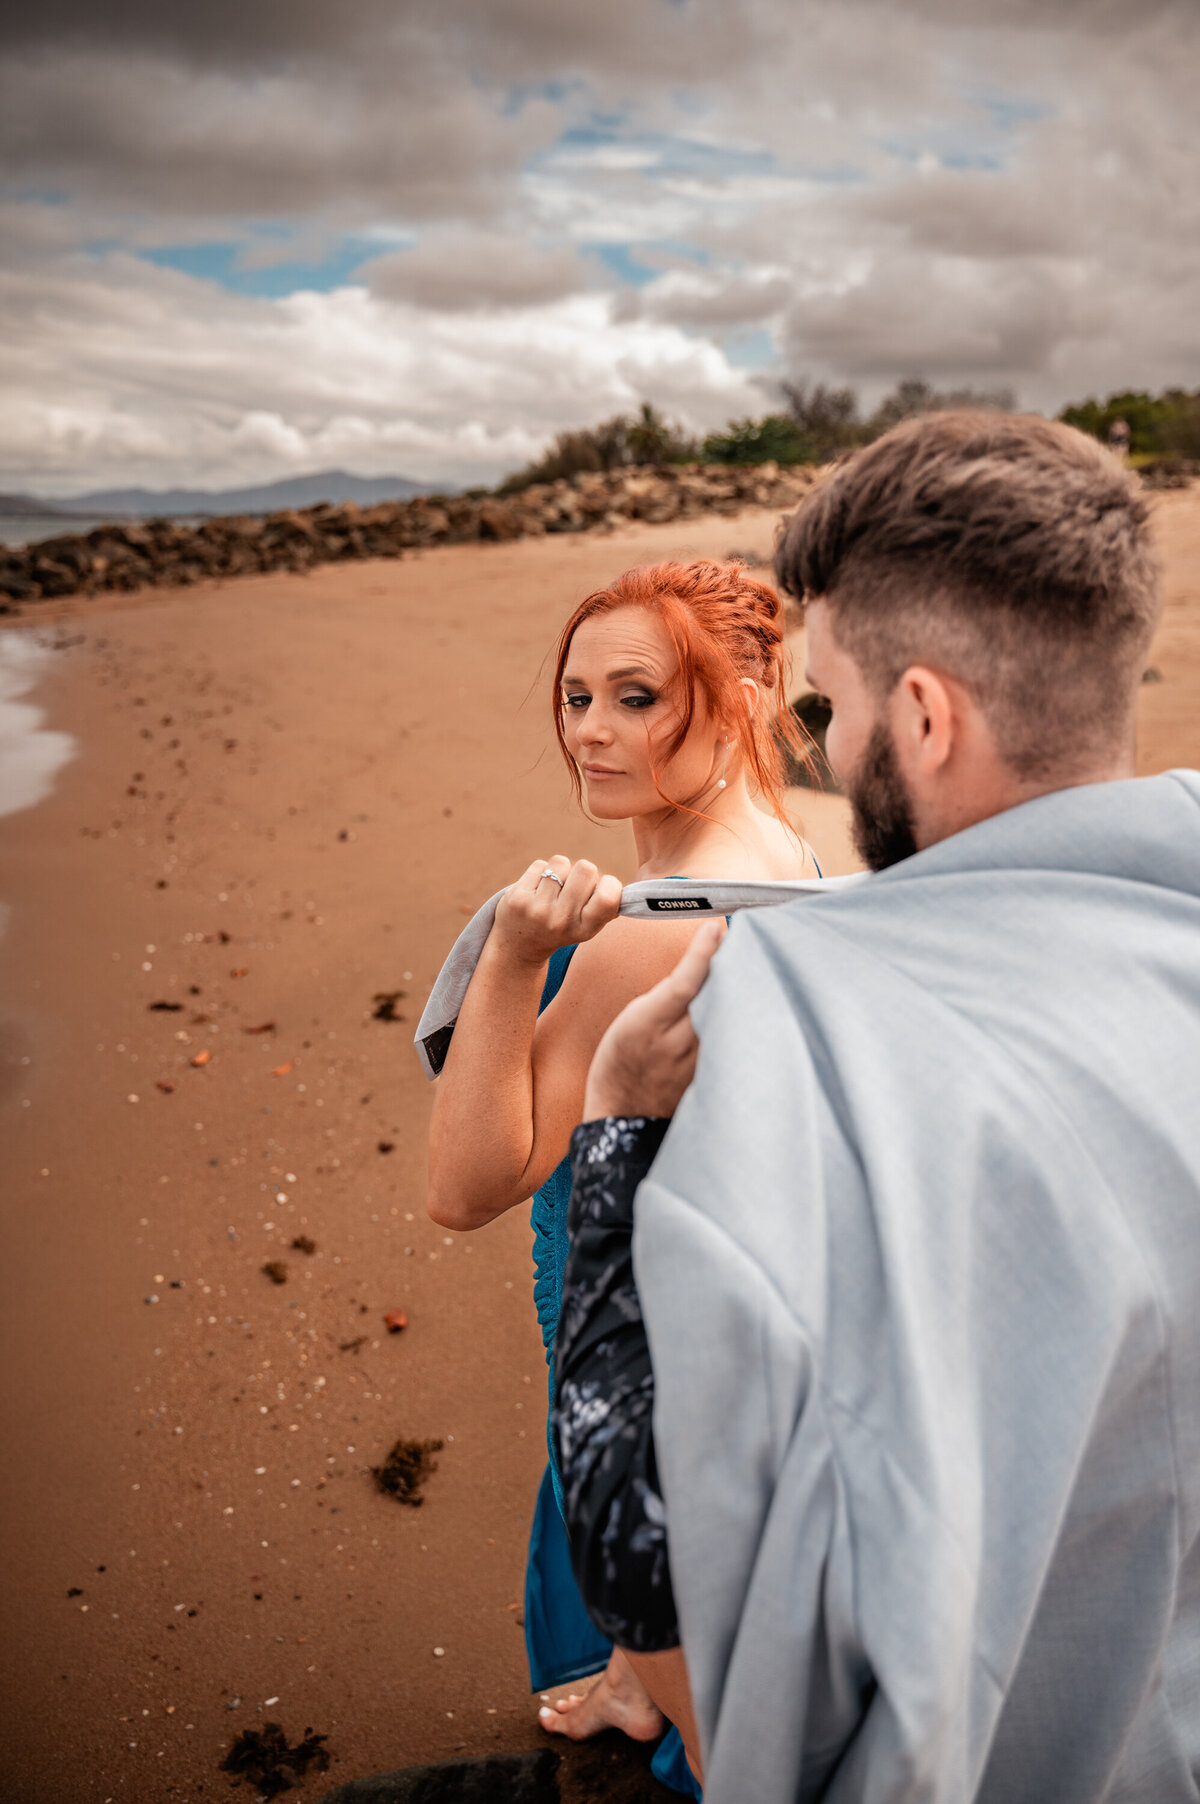 woman clutching fiance's tie and dragging him along the beach - Townsville Engagement Photography by Jamie Simmons